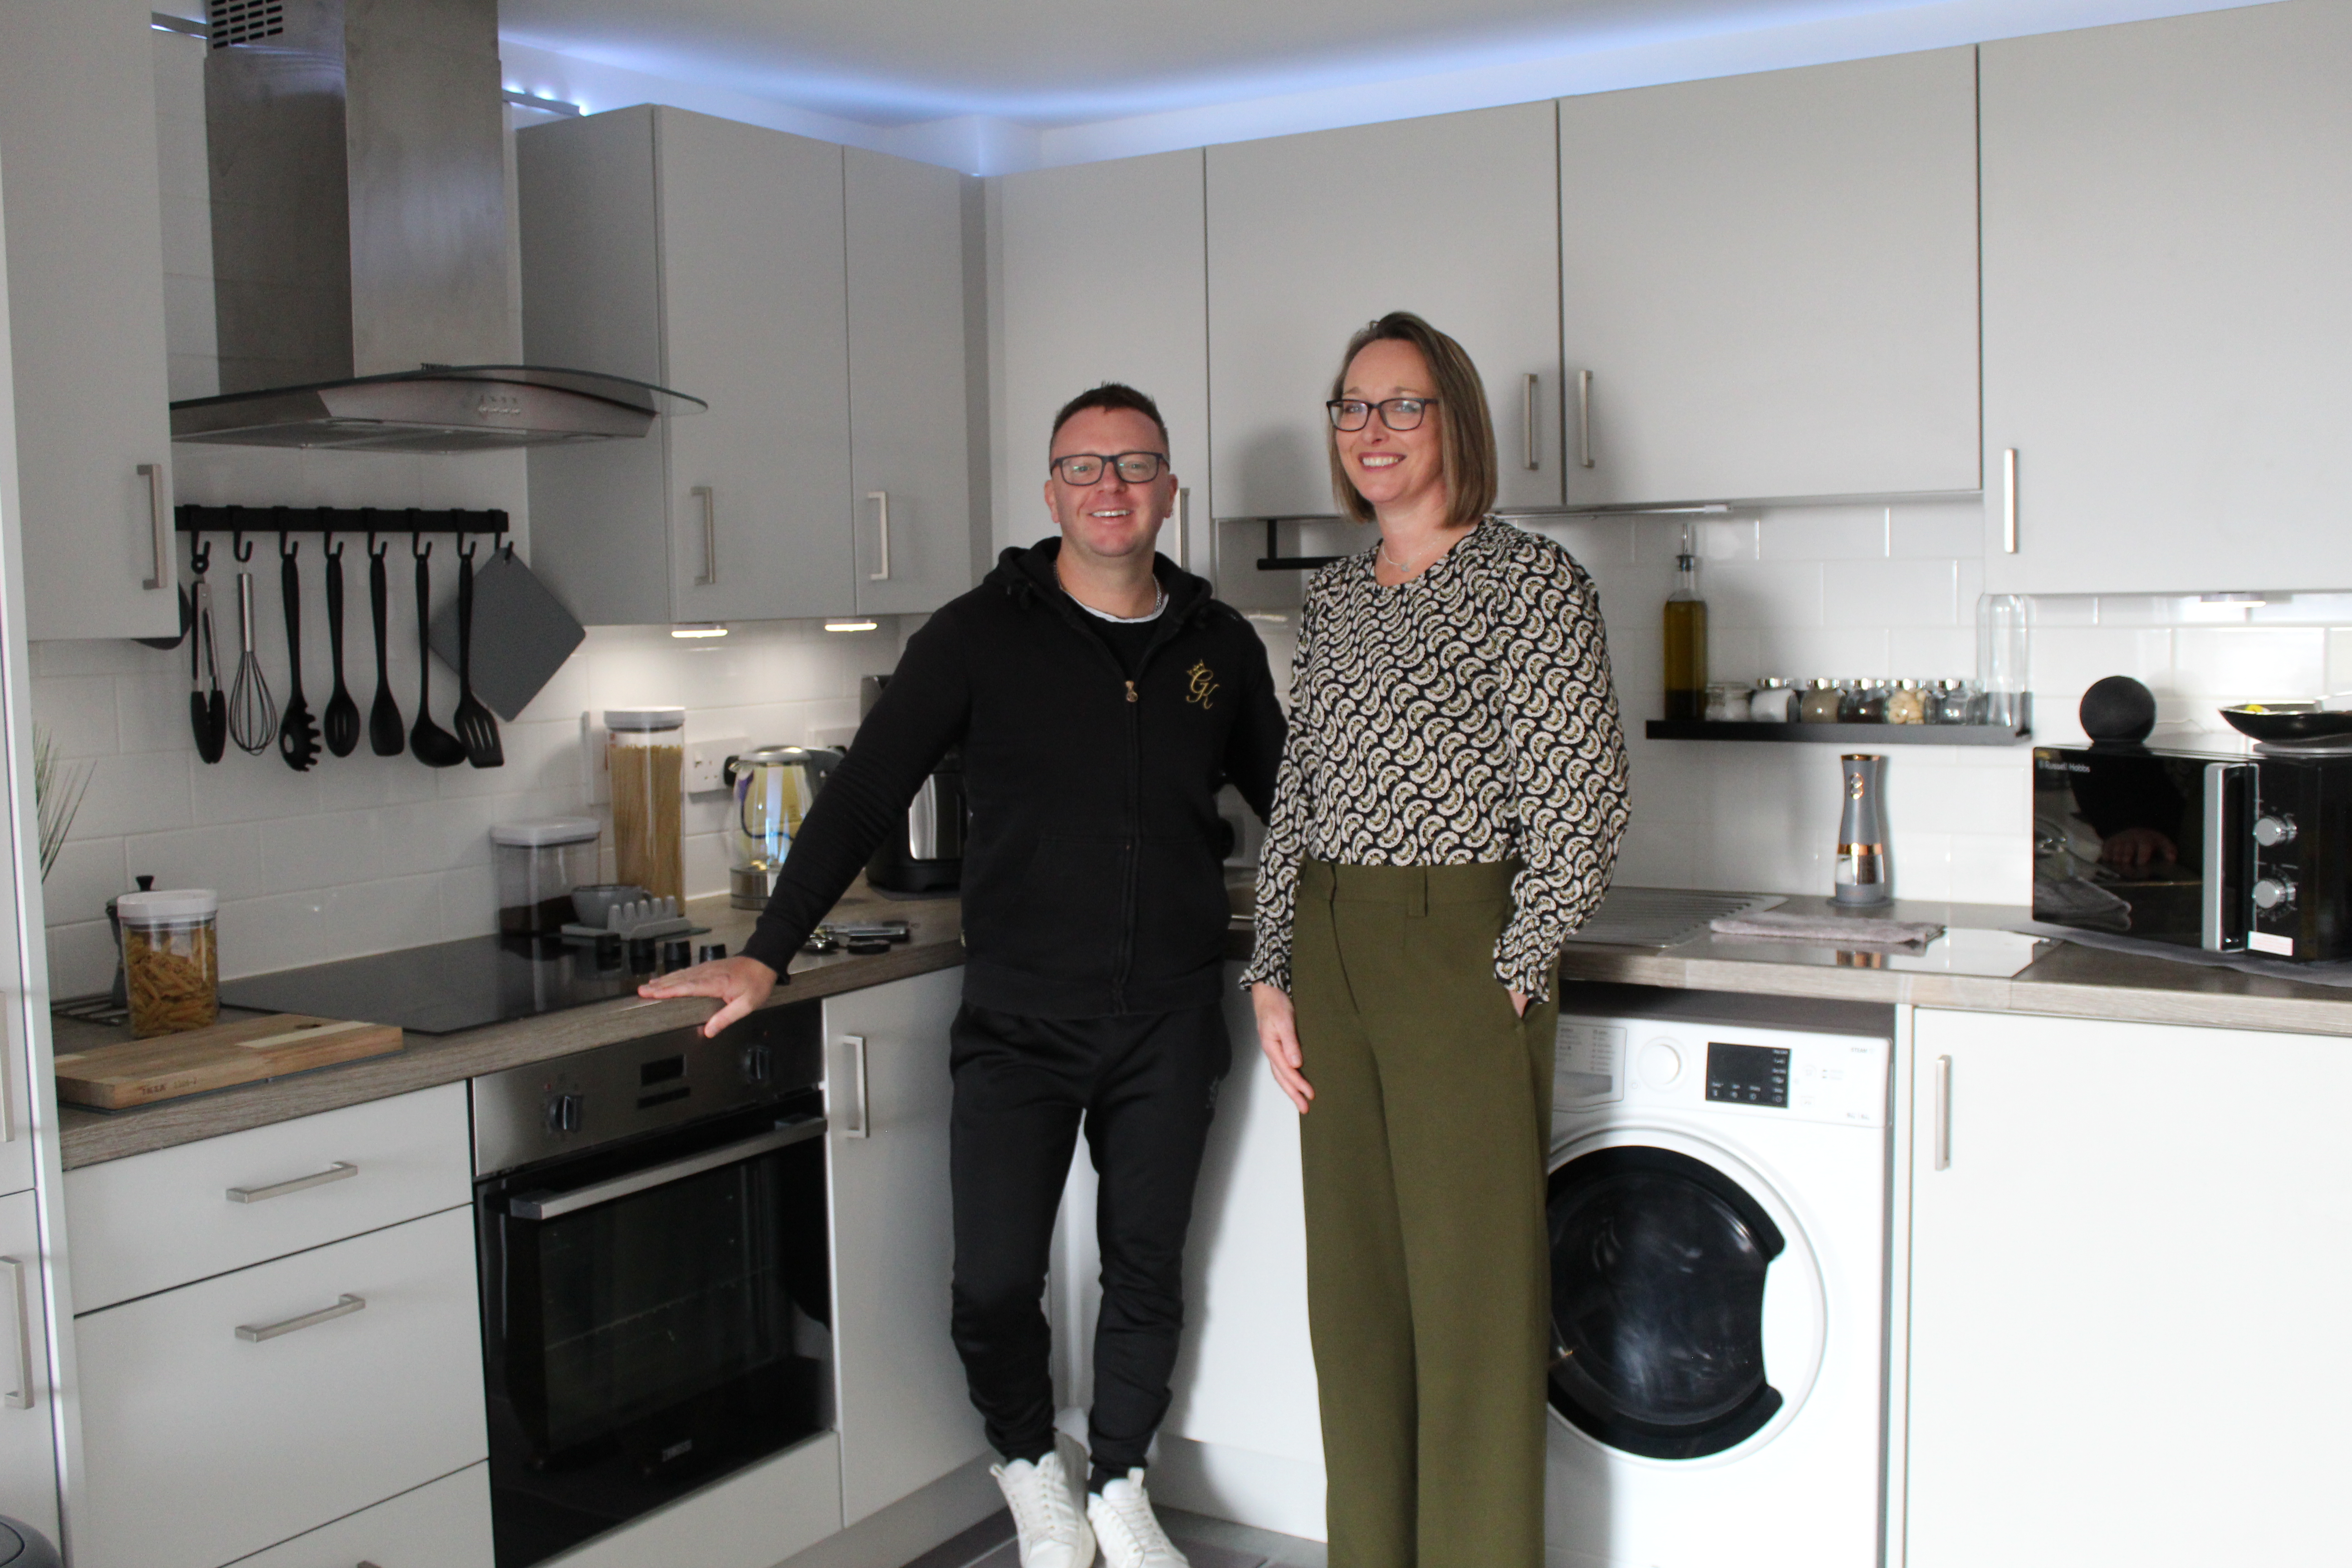 Glasgow Meat Market homes handed over to new residents